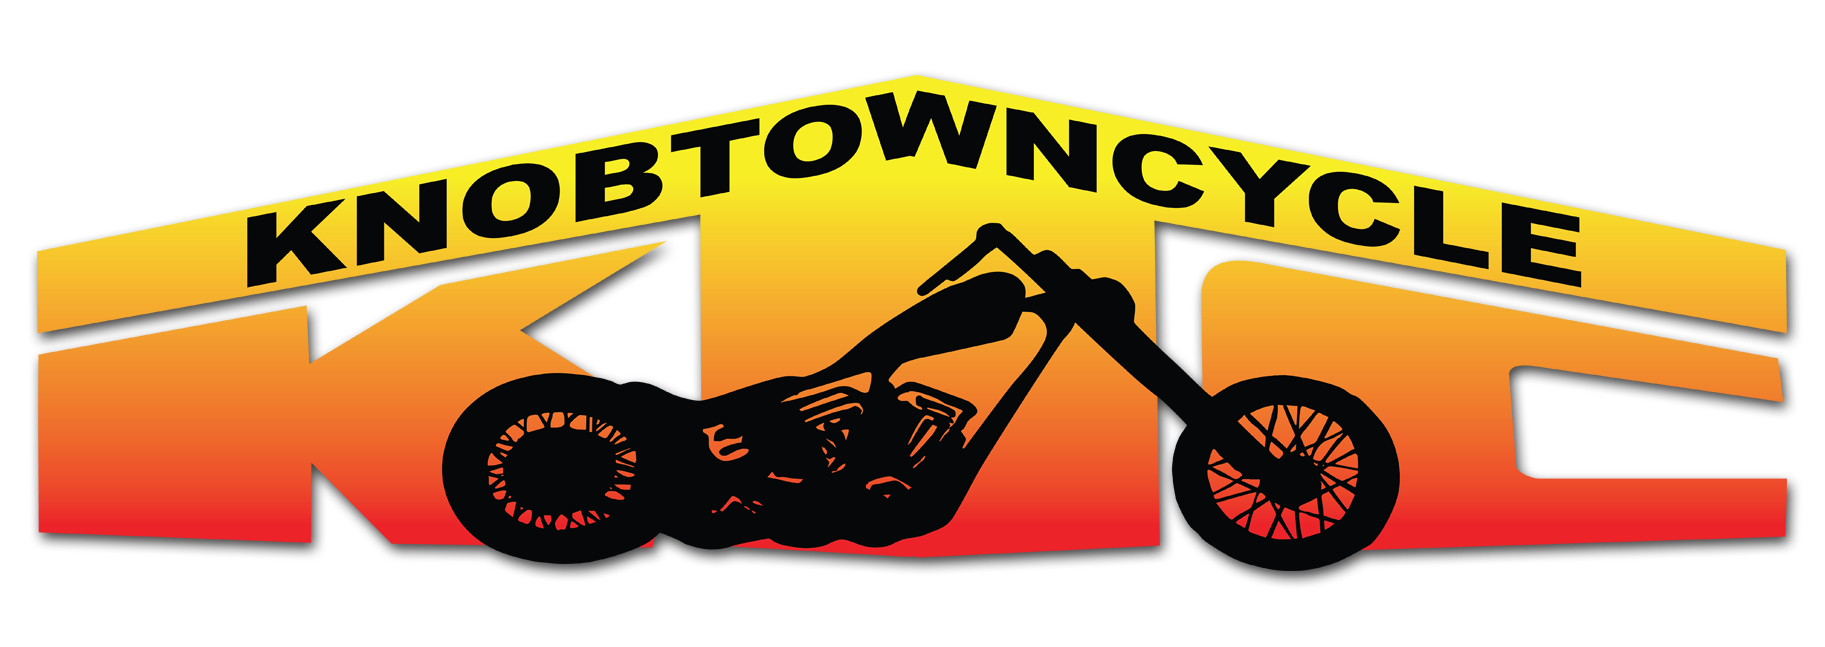 Knobtown Cycle - Kansas City's Motorcycle Shop